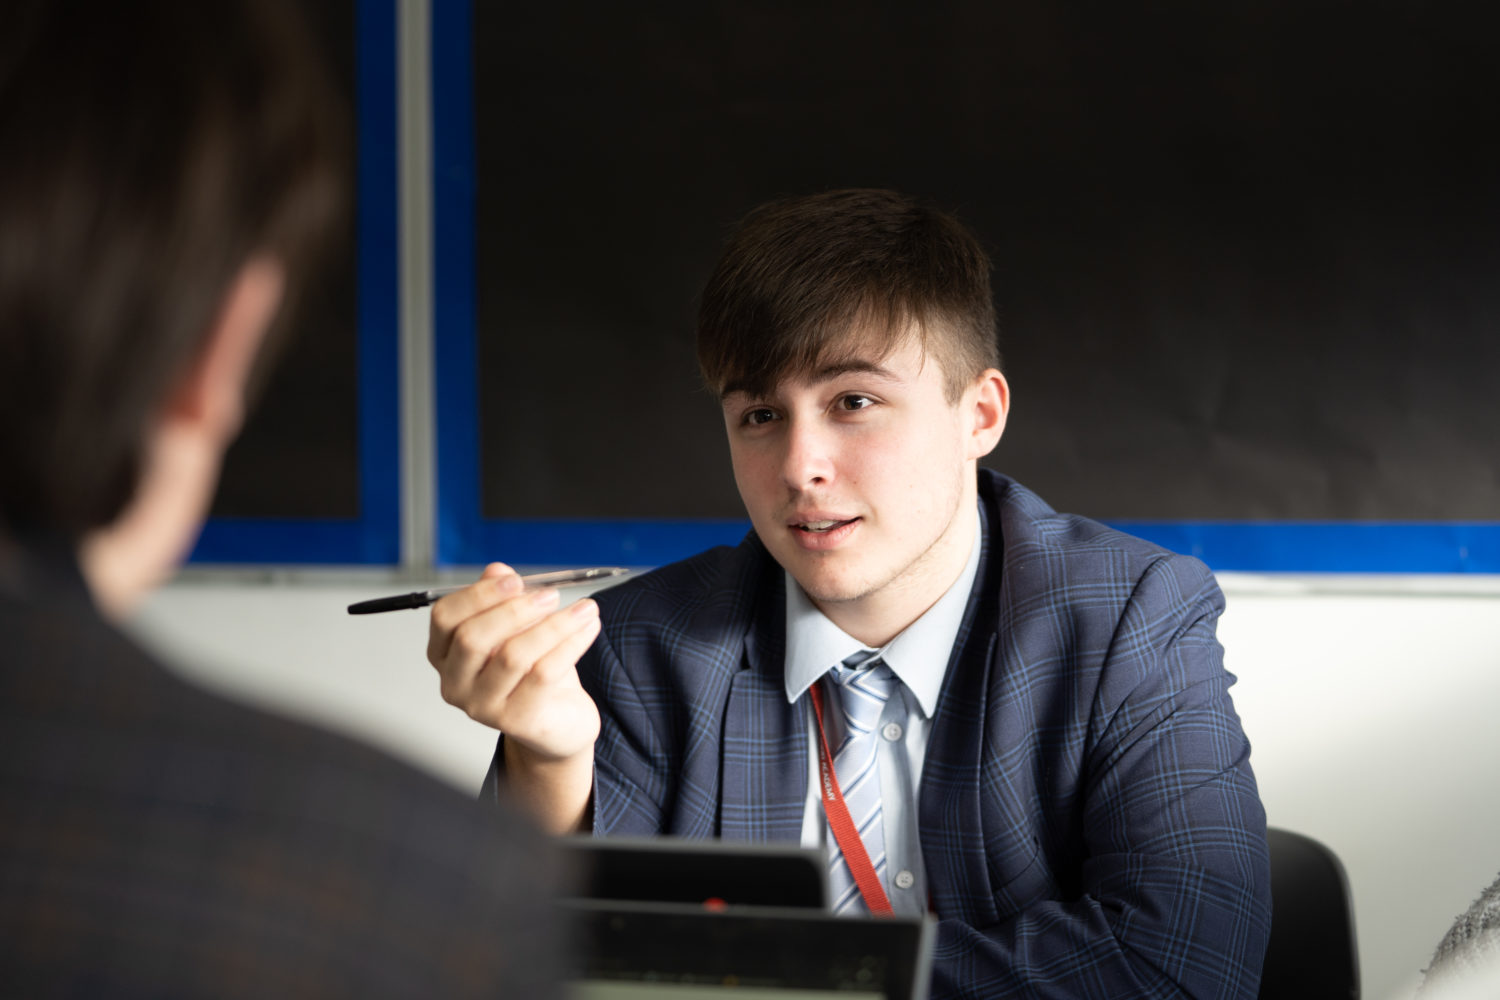 A student in a suit holding a pen talking to someone